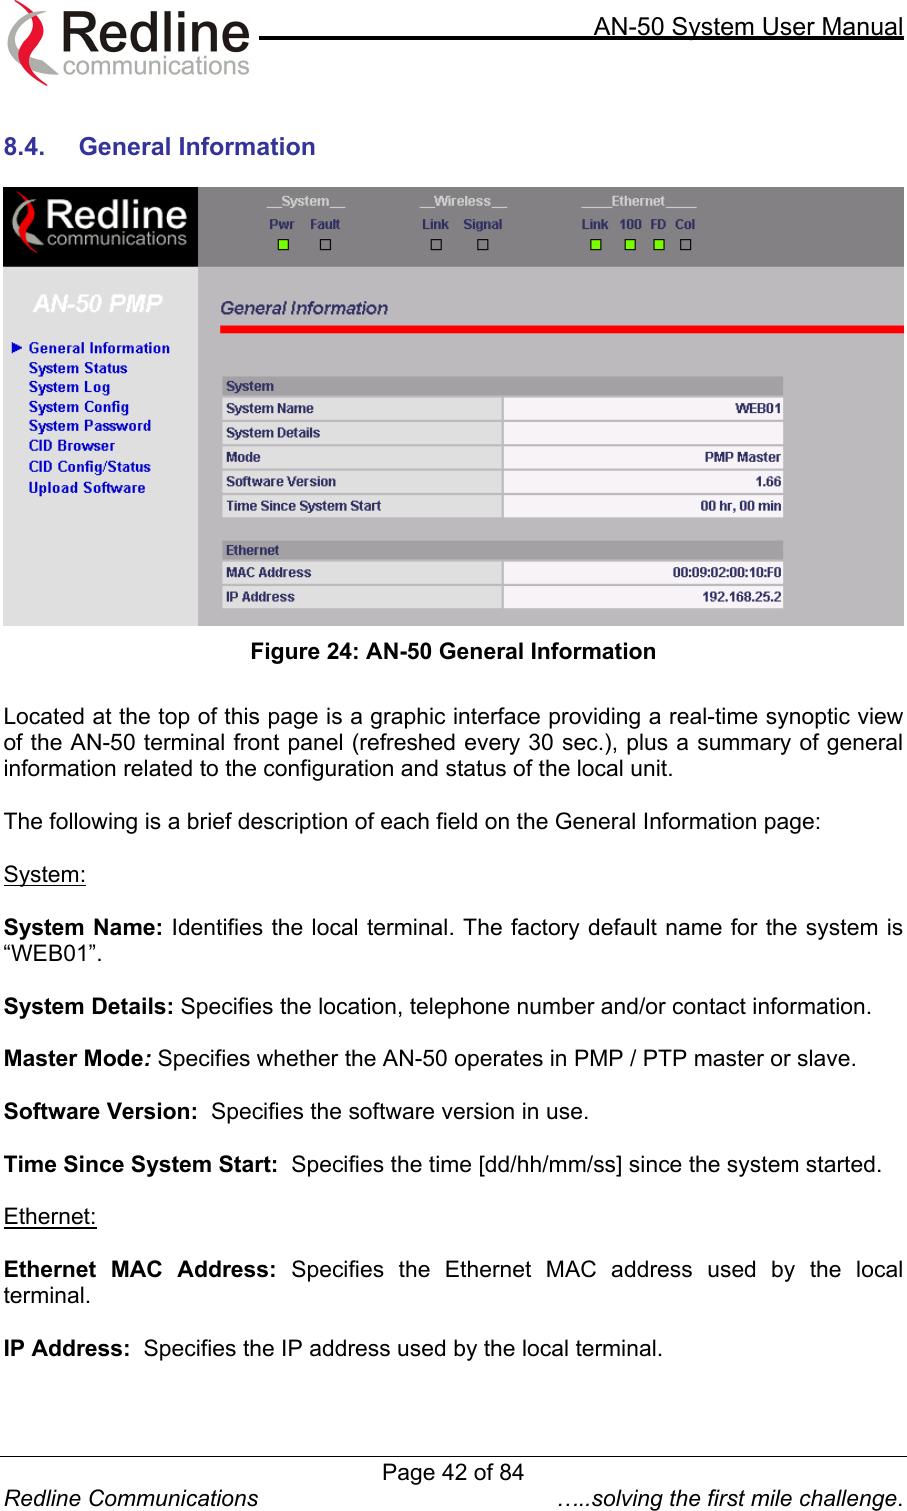     AN-50 System User Manual  Redline Communications  …..solving the first mile challenge.  8.4. General Information    Figure 24: AN-50 General Information  Located at the top of this page is a graphic interface providing a real-time synoptic view of the AN-50 terminal front panel (refreshed every 30 sec.), plus a summary of general information related to the configuration and status of the local unit.   The following is a brief description of each field on the General Information page:  System:  System Name: Identifies the local terminal. The factory default name for the system is “WEB01”.  System Details: Specifies the location, telephone number and/or contact information.  Master Mode: Specifies whether the AN-50 operates in PMP / PTP master or slave.  Software Version:  Specifies the software version in use.  Time Since System Start:  Specifies the time [dd/hh/mm/ss] since the system started.  Ethernet:  Ethernet MAC Address: Specifies the Ethernet MAC address used by the local terminal.  IP Address:  Specifies the IP address used by the local terminal.  Page 42 of 84